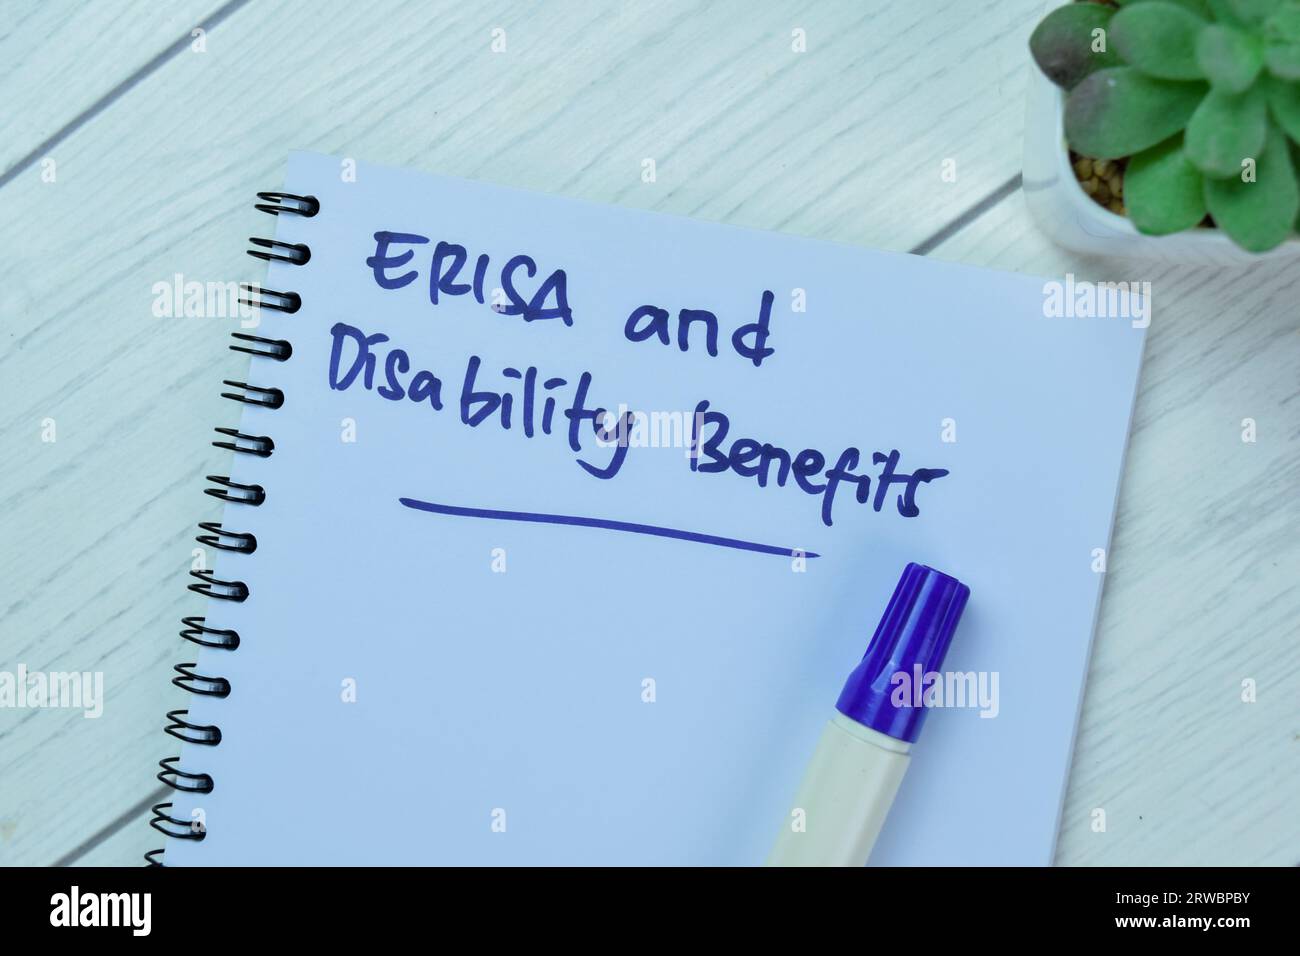 Concept of ERISA and Disability Benefits write on book isolated on Wooden Table. Stock Photo